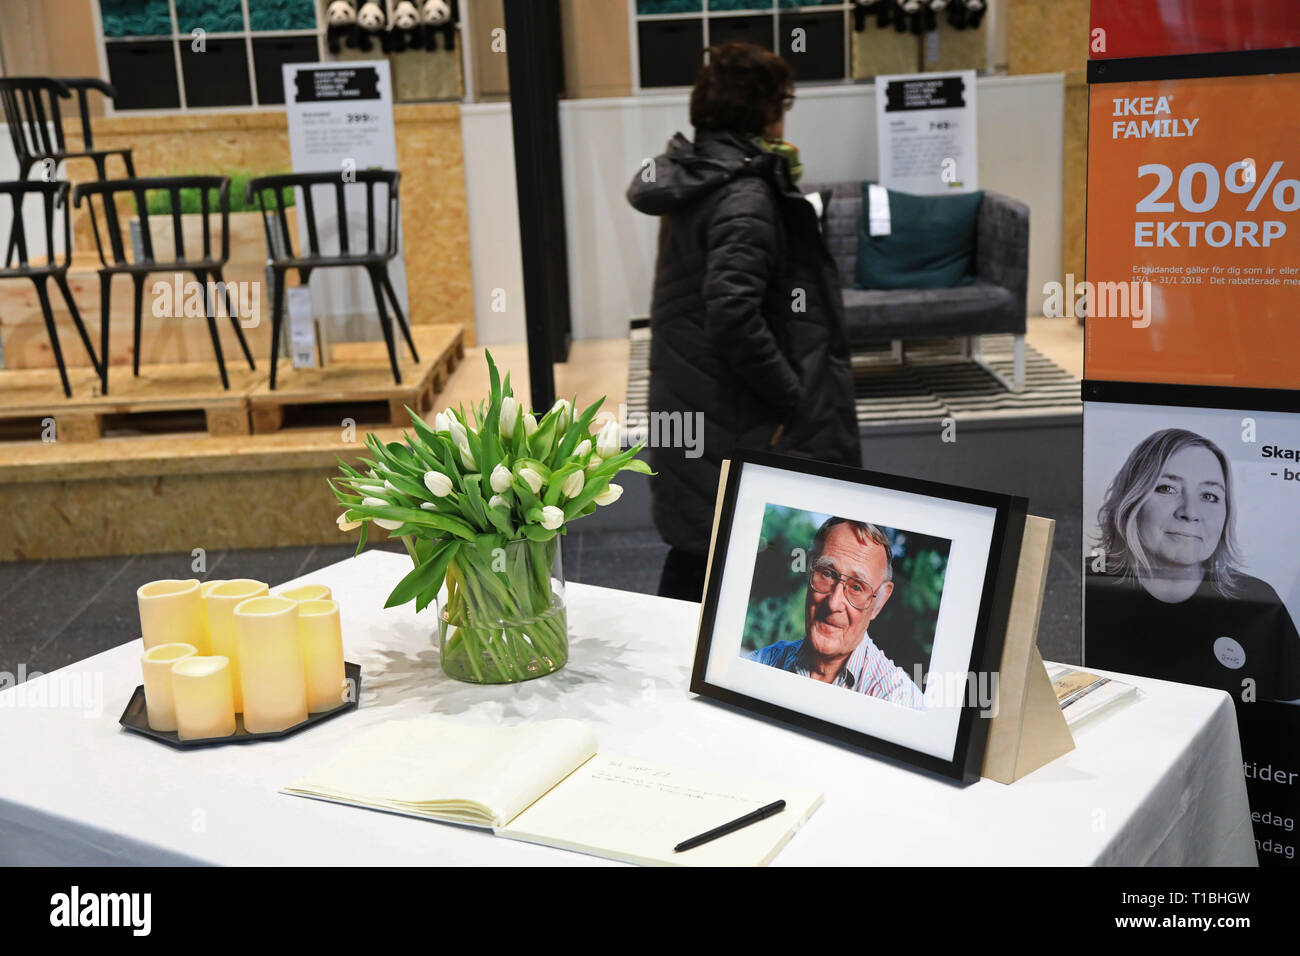 LINKÖPING 20180128 Condolence book and flowers on Ikea the day after the announcement that Ikea's founder and owner Ingvar Kamprad died at the age of 91. Photo Jeppe Gustafsson Stock Photo